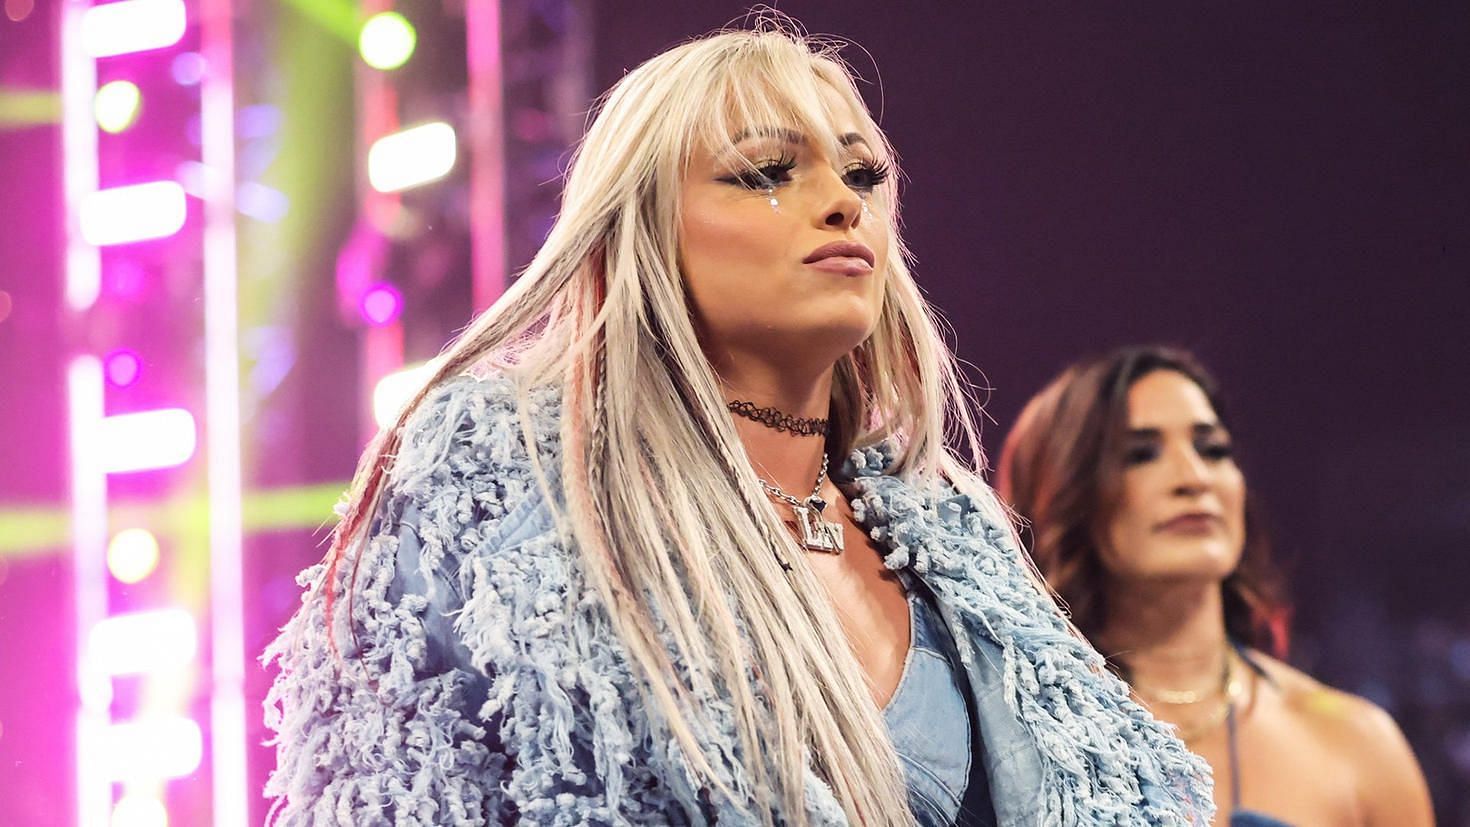 Liv Morgan returned to SmackDown this week